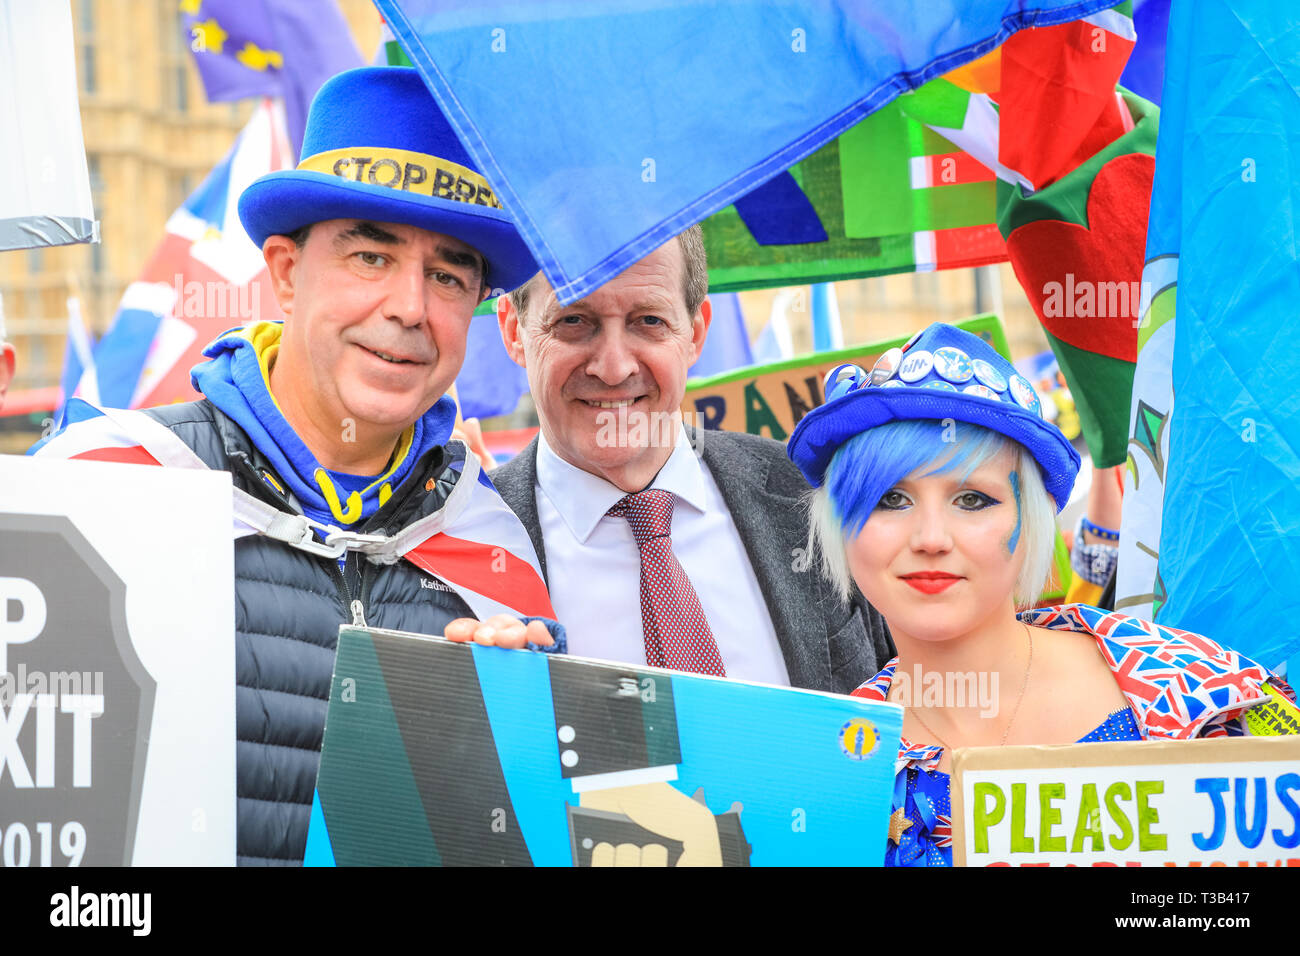 Westminster, UK, 08th April 2019. Alastair Campbell (middlel), Breit 'shouty man' Steven Bray (left) , activist Madeleine Kay (right) . Sodem, group of Anti-Brexit protesters outside the Houses of Parliament in Westminster have organised a 'Brexit Sing Off', and are joined by Yorkshire for Europe, opera singer Dame Sarah Connolly, journalist and former Labour Communications Director Alastair Campbell and others for a musical protest against Brexit. Credit: Imageplotter/Alamy Live News Stock Photo